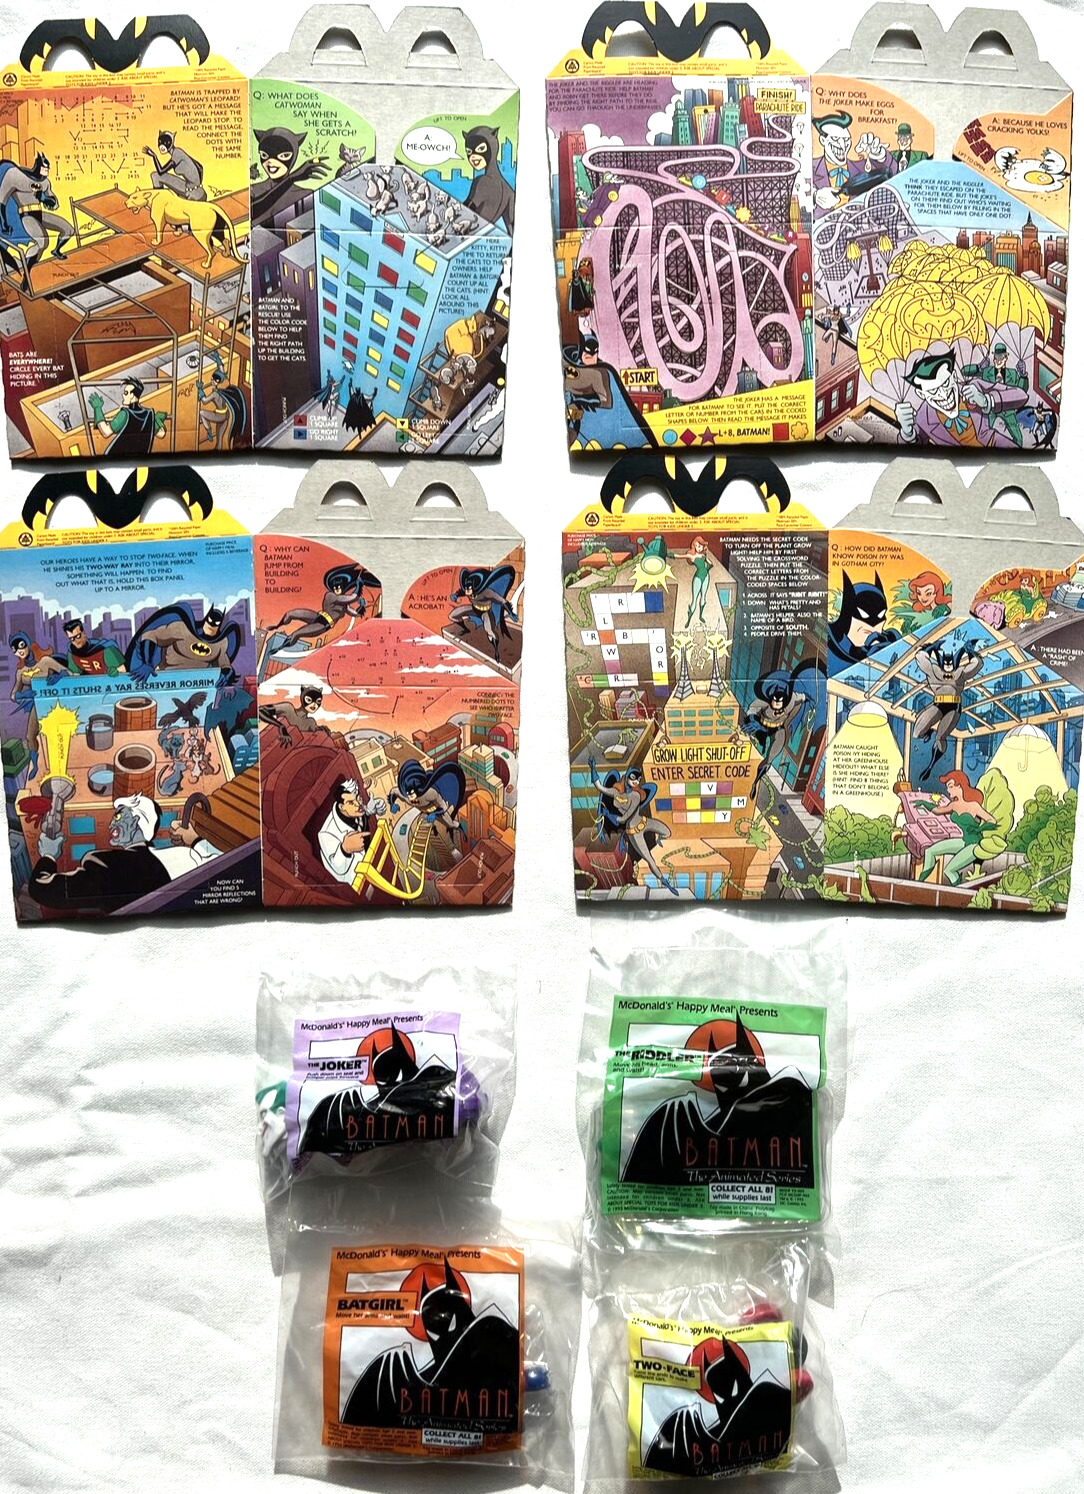 Complete Set of 8 McDonald’s/Batman Happy Meal Boxes & Toys - BRAND NEW, MINT